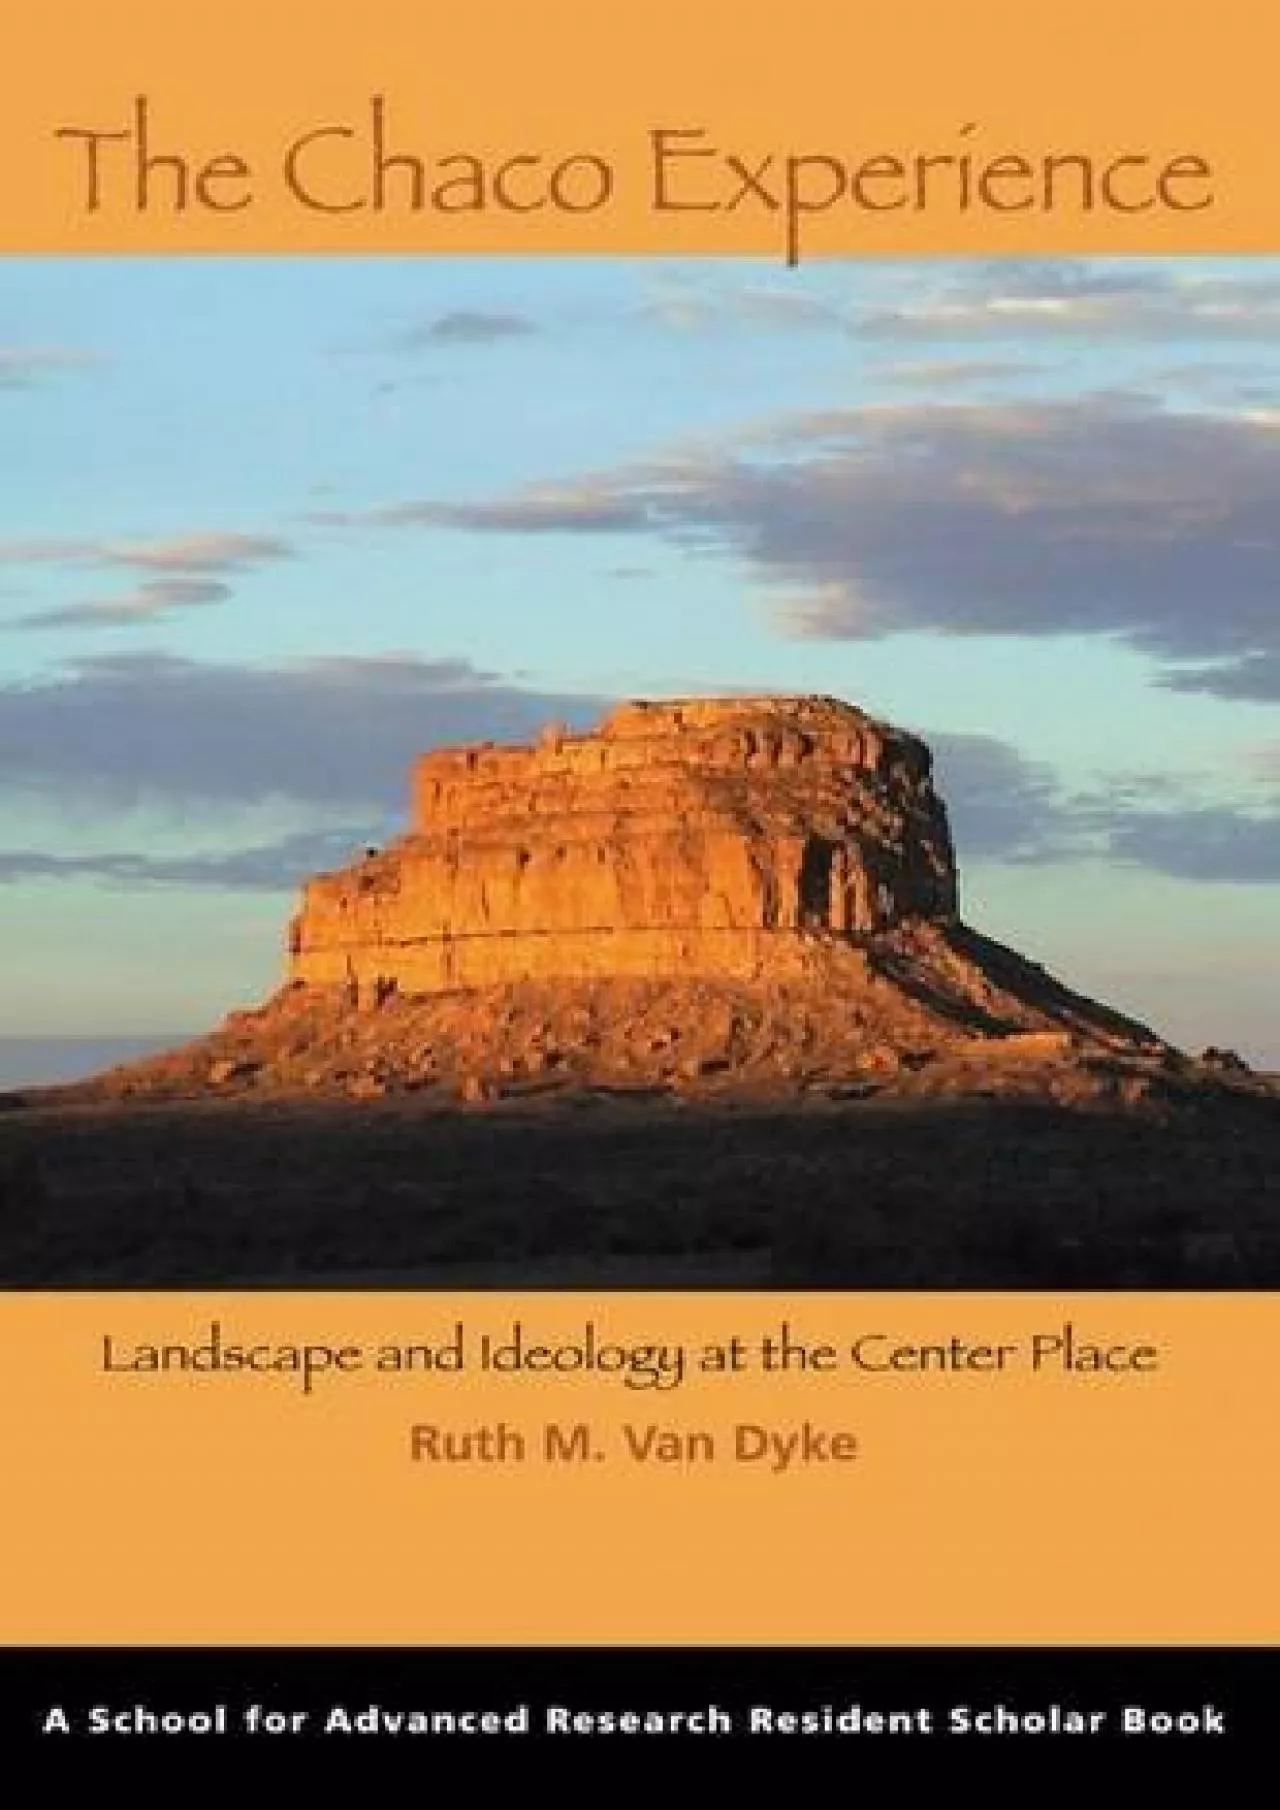 (BOOK)-The Chaco Experience: Landscape and Ideology at the Center Place (A School for